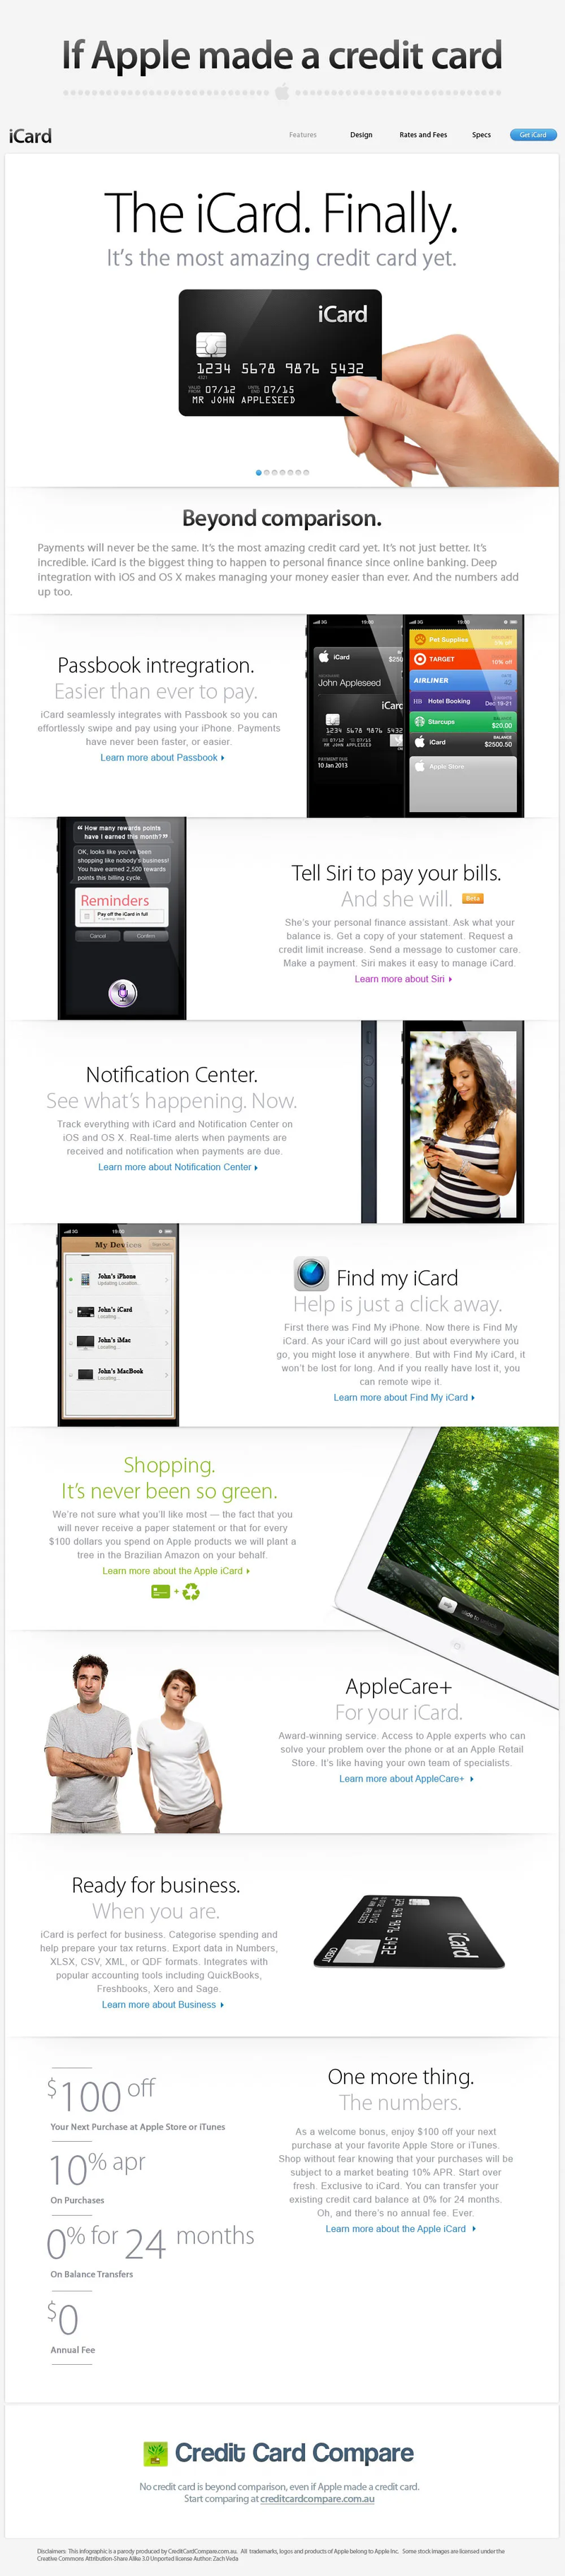 Apple iCard credit card infographic.